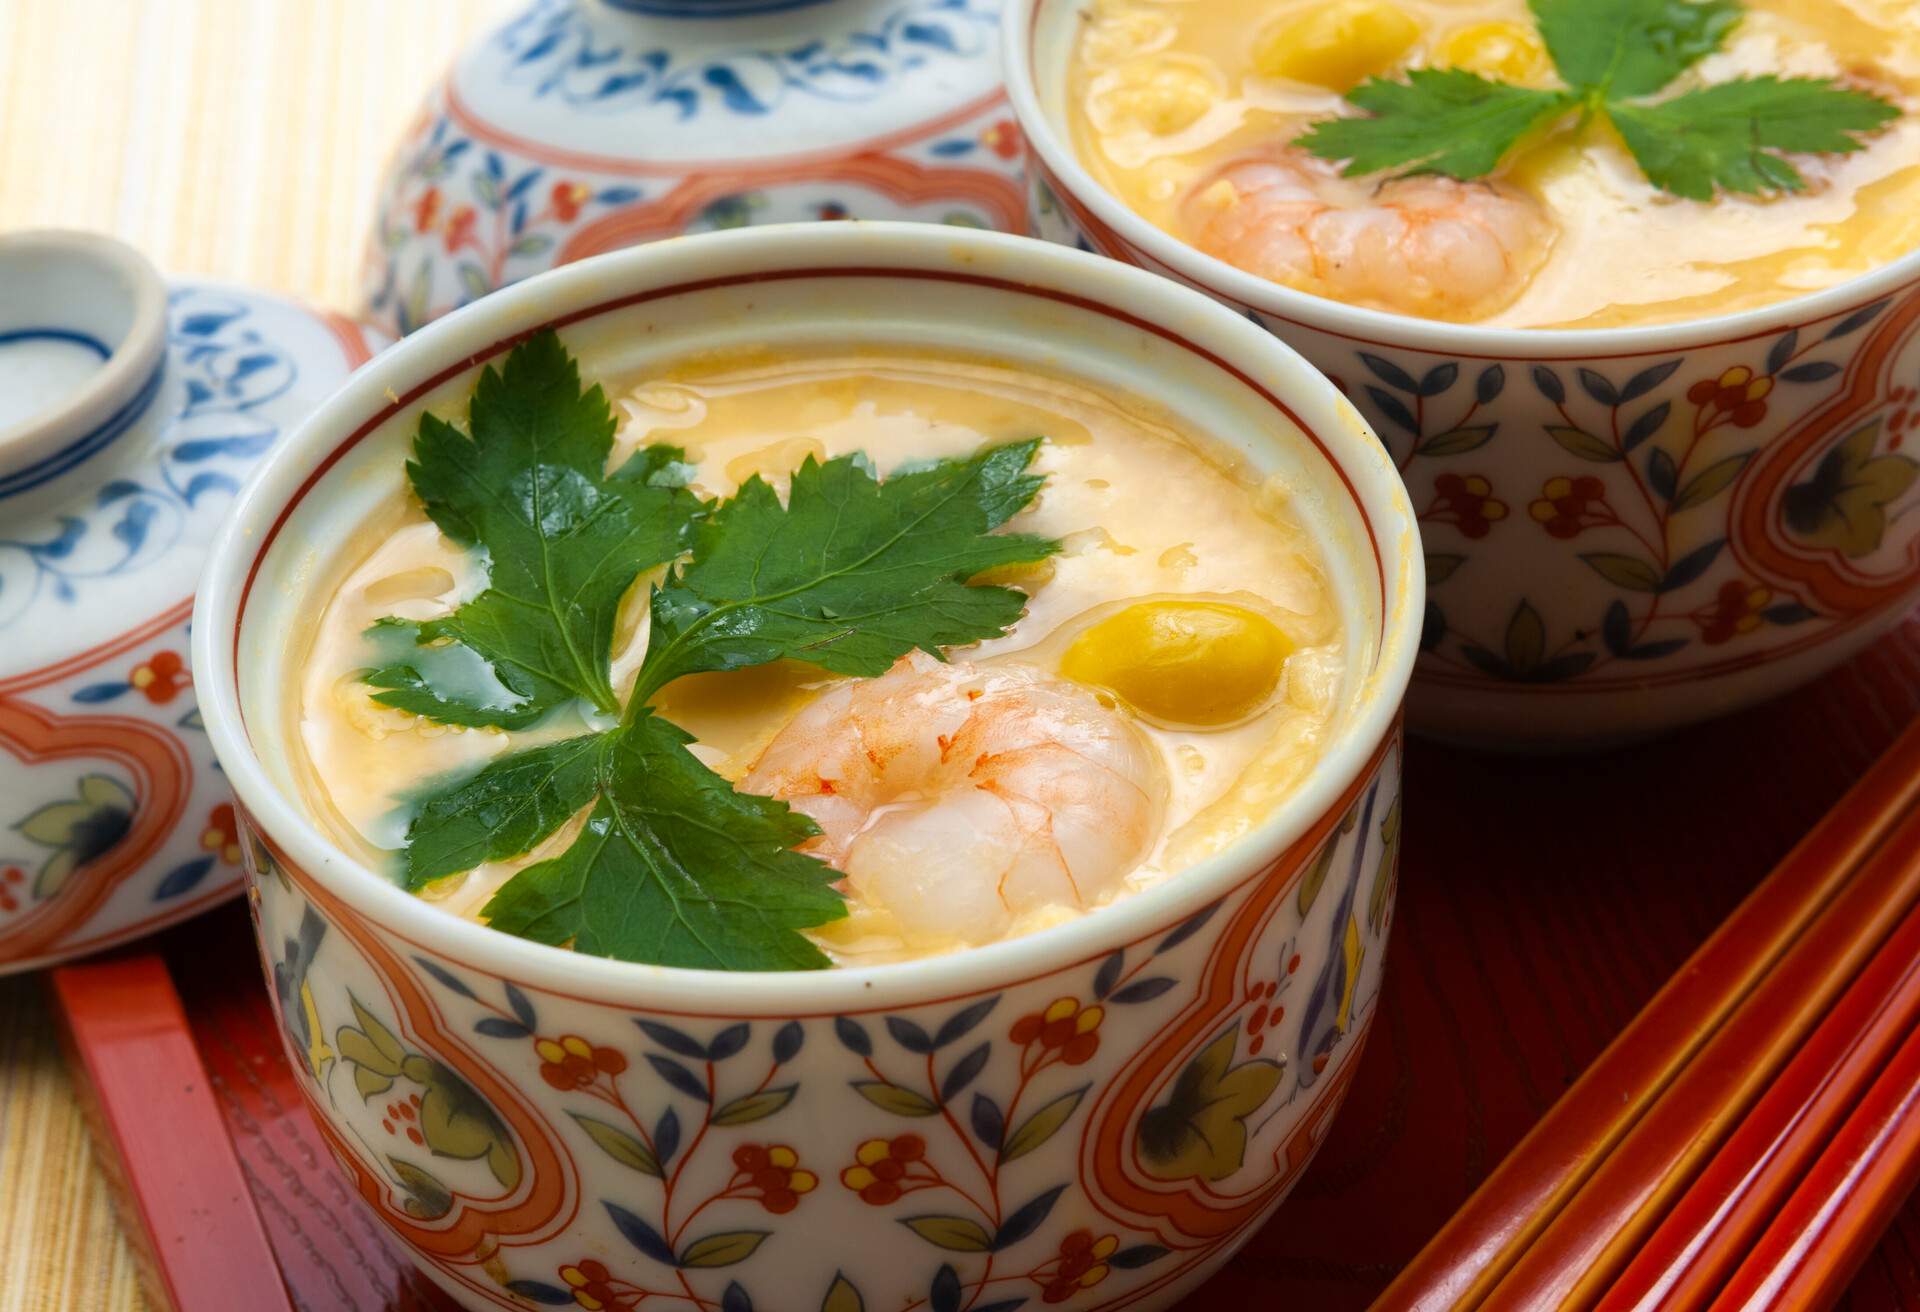 Chawanmushi is Japanese cuisine, steamed cooked egg with broth.